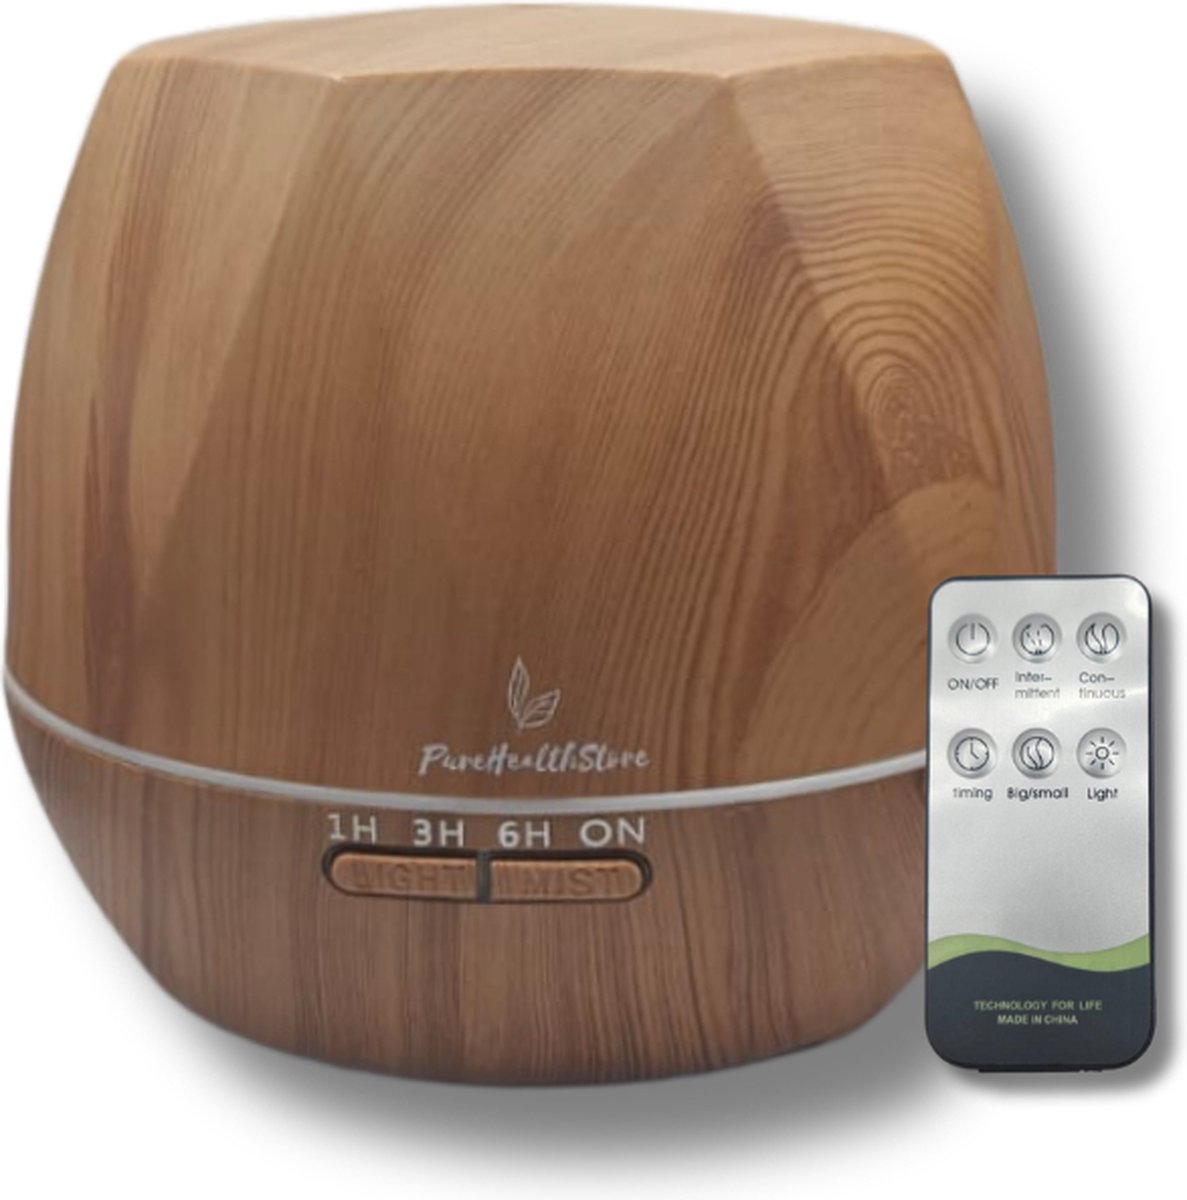 Aroma diffuser - Hout Look - Pure Health Store